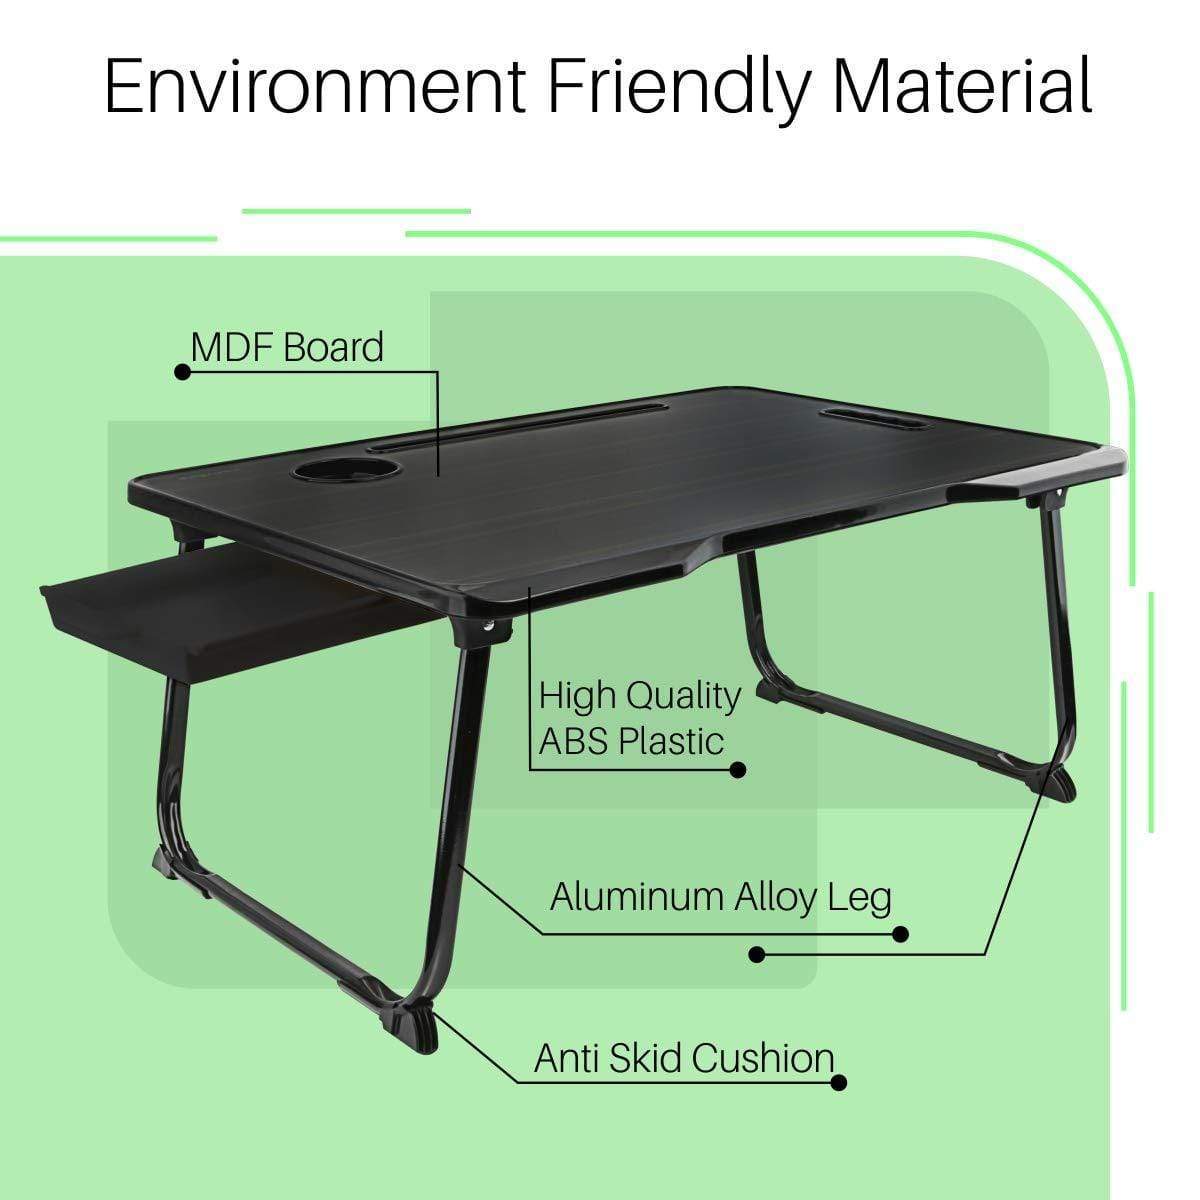 Portronics My Buddy One Plus POR-1191 Multifunctional Laptop Table Lapdesk for Office Home with Cupholder Bed Study Table (Black)-laptop care-dealsplant